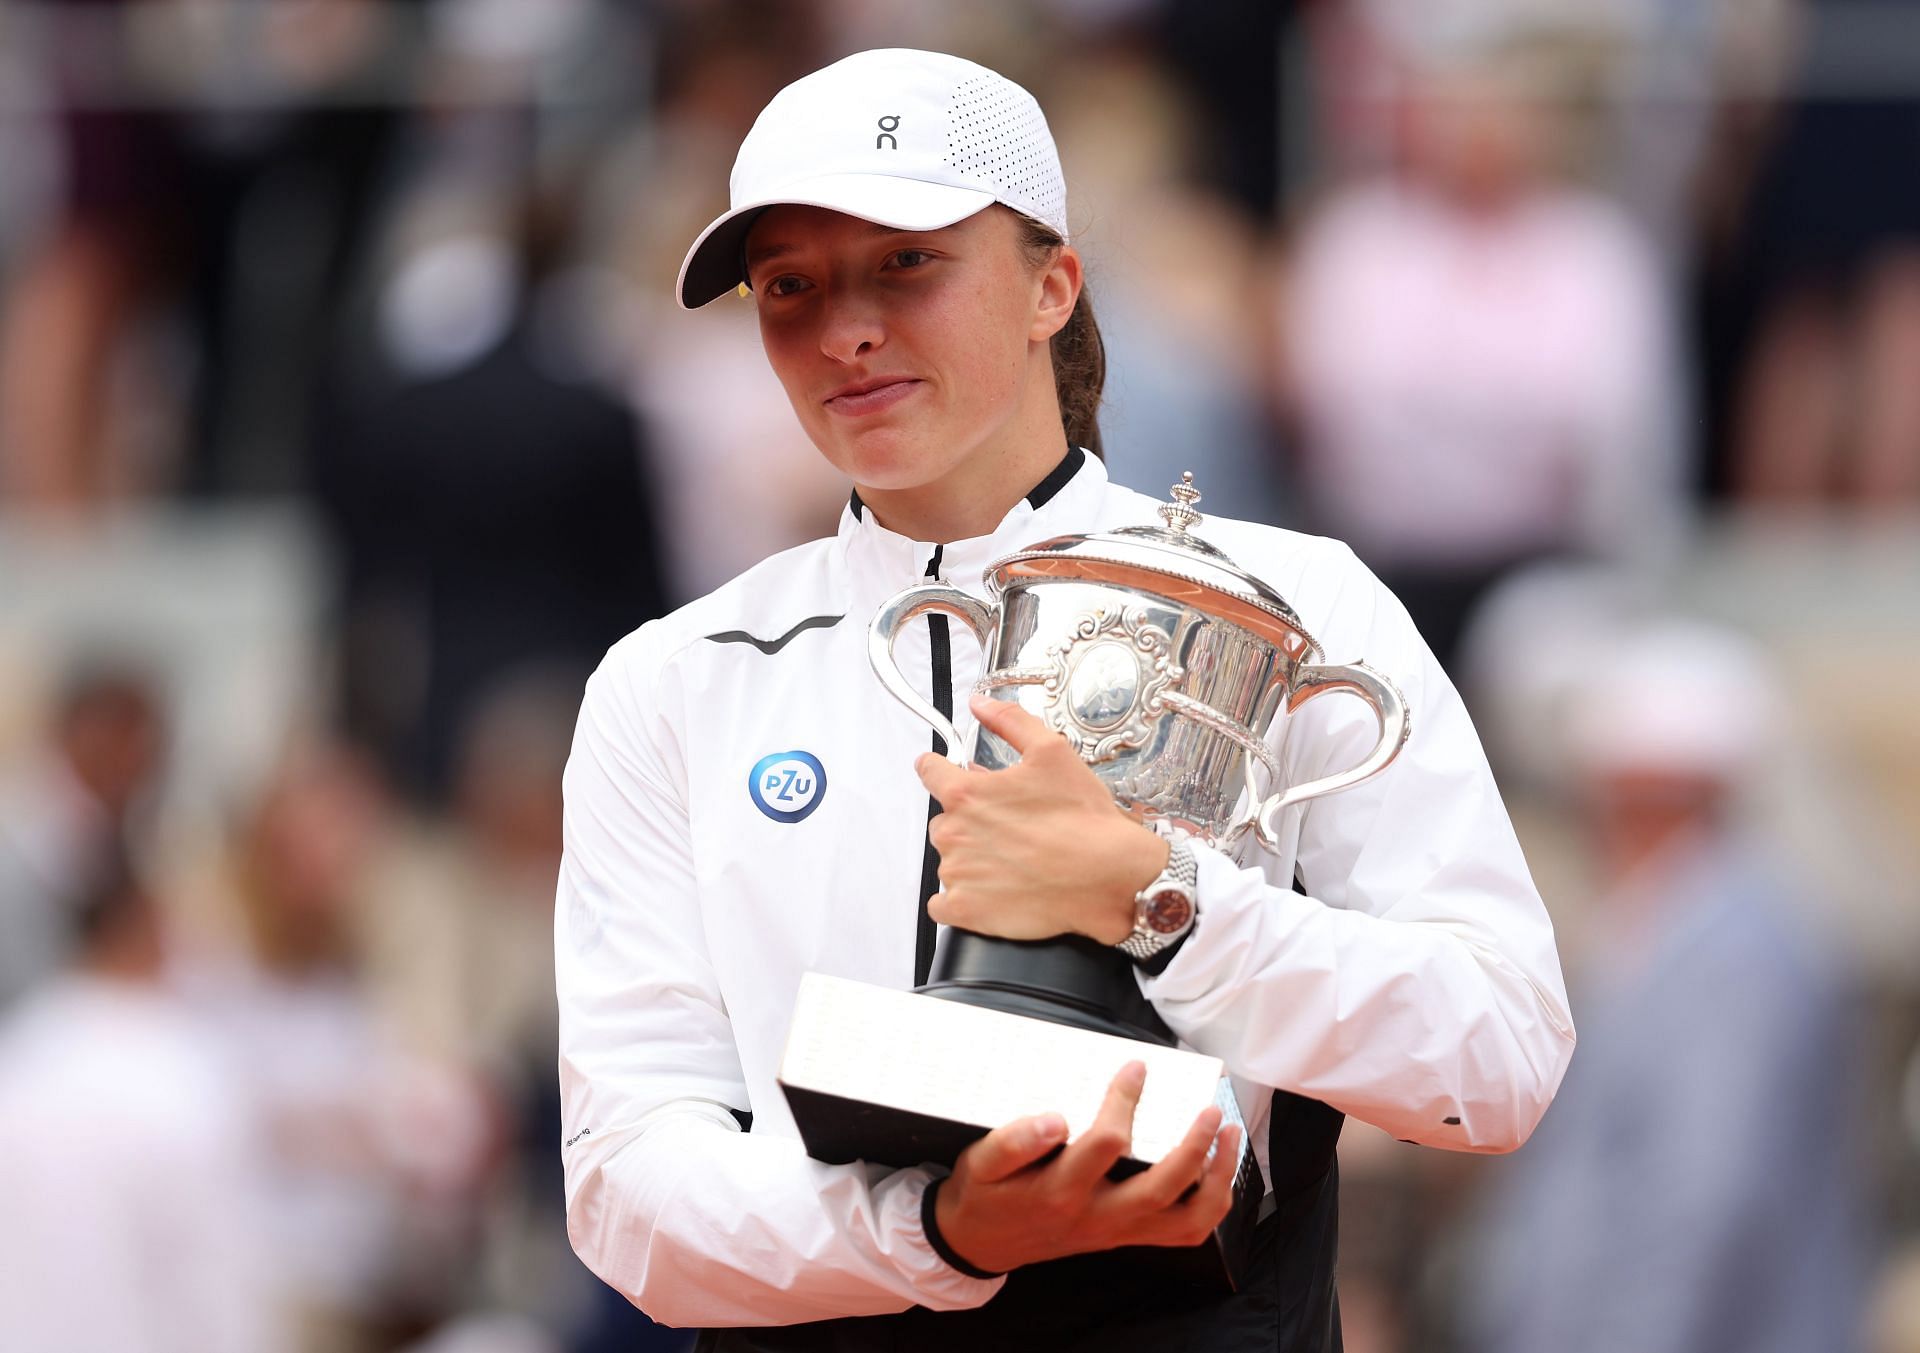 Iga Swiatek pictured with her French Open trophy.